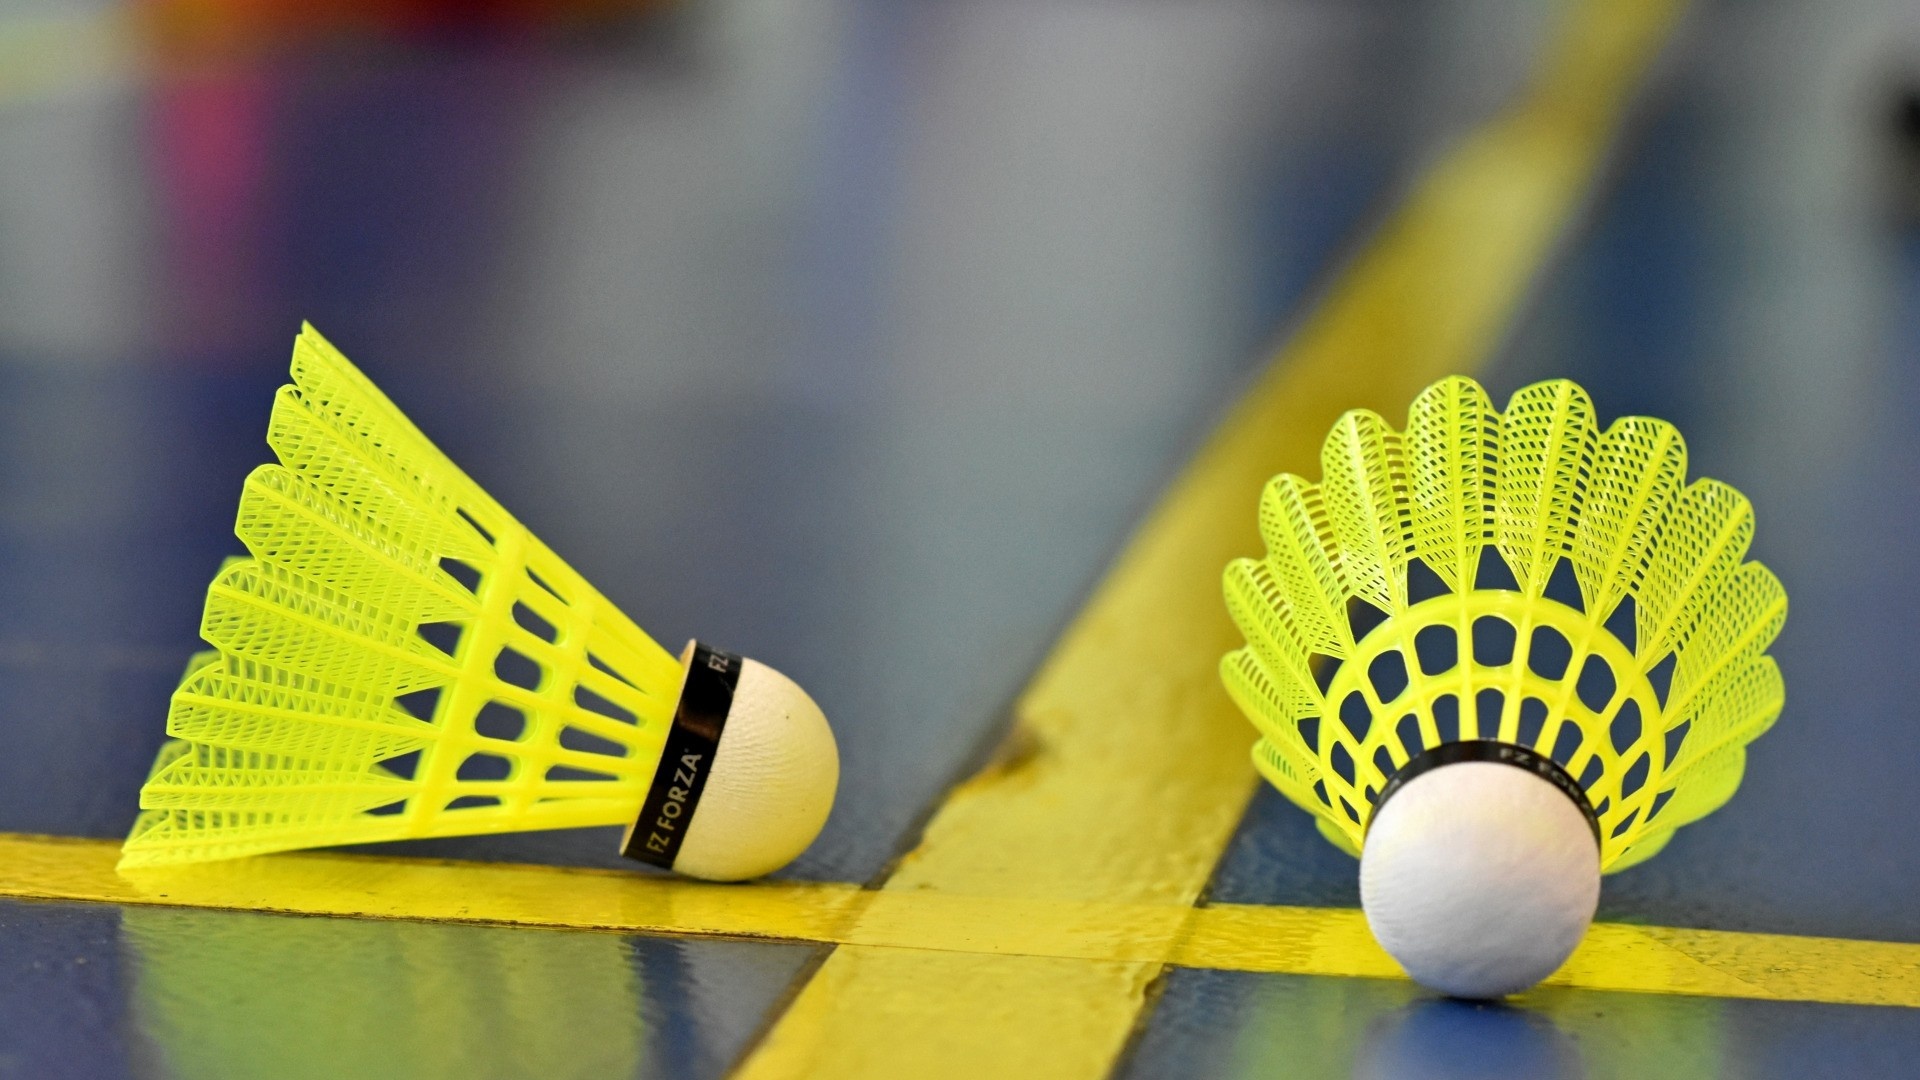 Sporting badminton wallpapers, Exciting matches, Competitive energy, Sports visuals, 1920x1080 Full HD Desktop